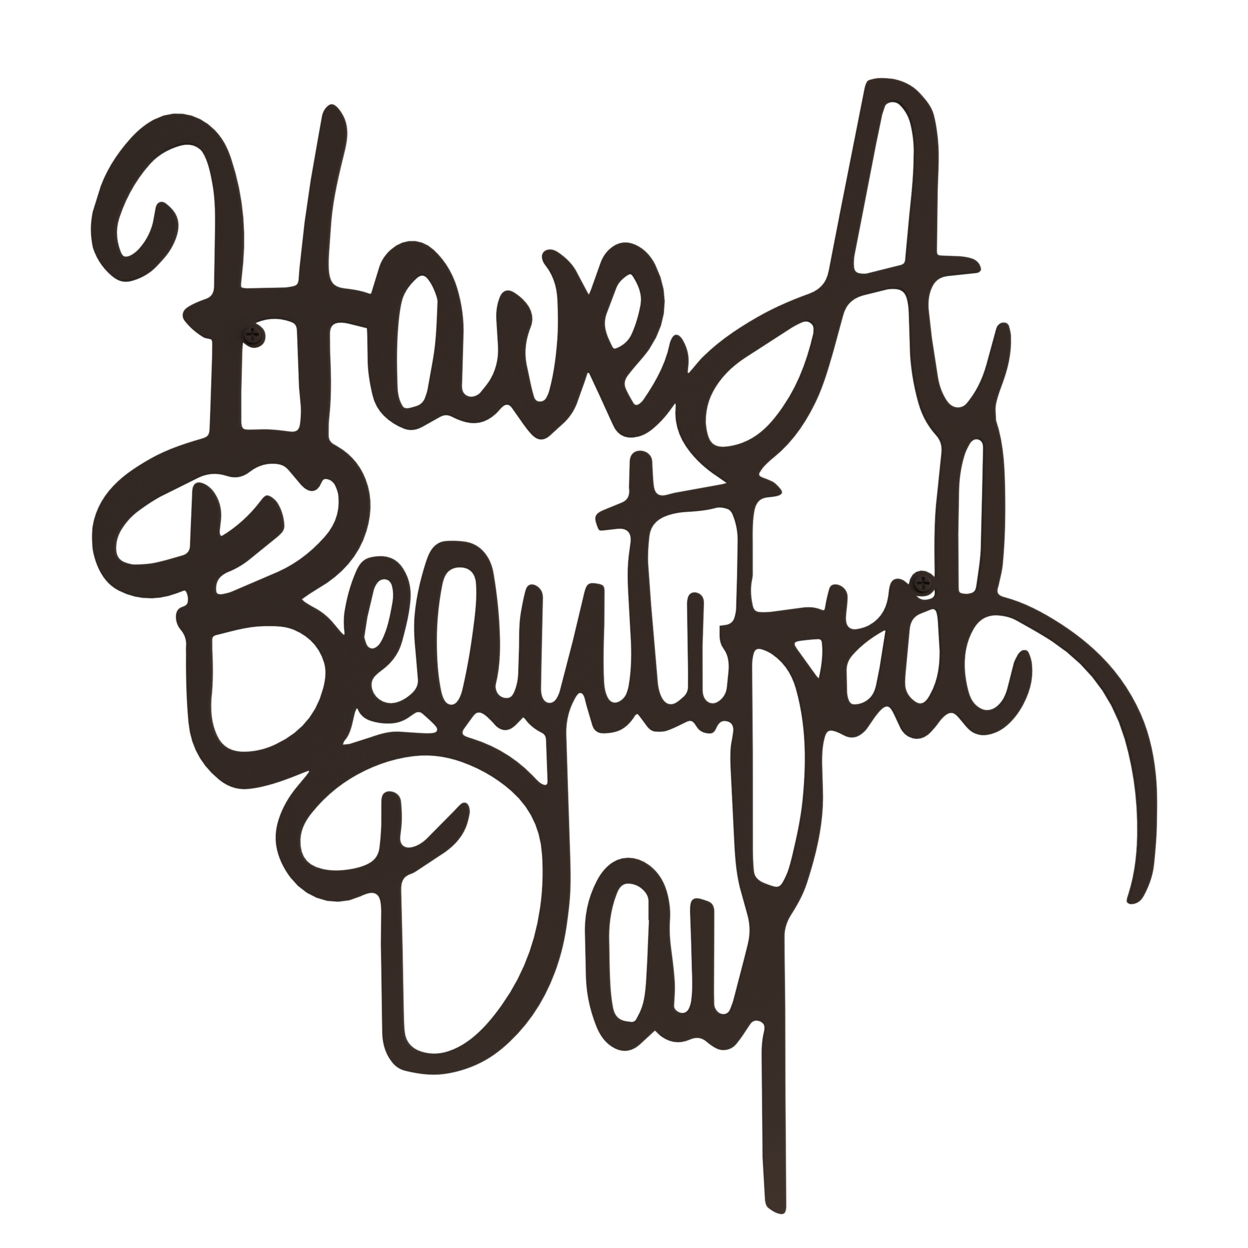 Metal Cutout-Have A Beautiful Day Decorative Wall Sign-3D Word Art Home Accent Decor-Perfect Modern Rustic